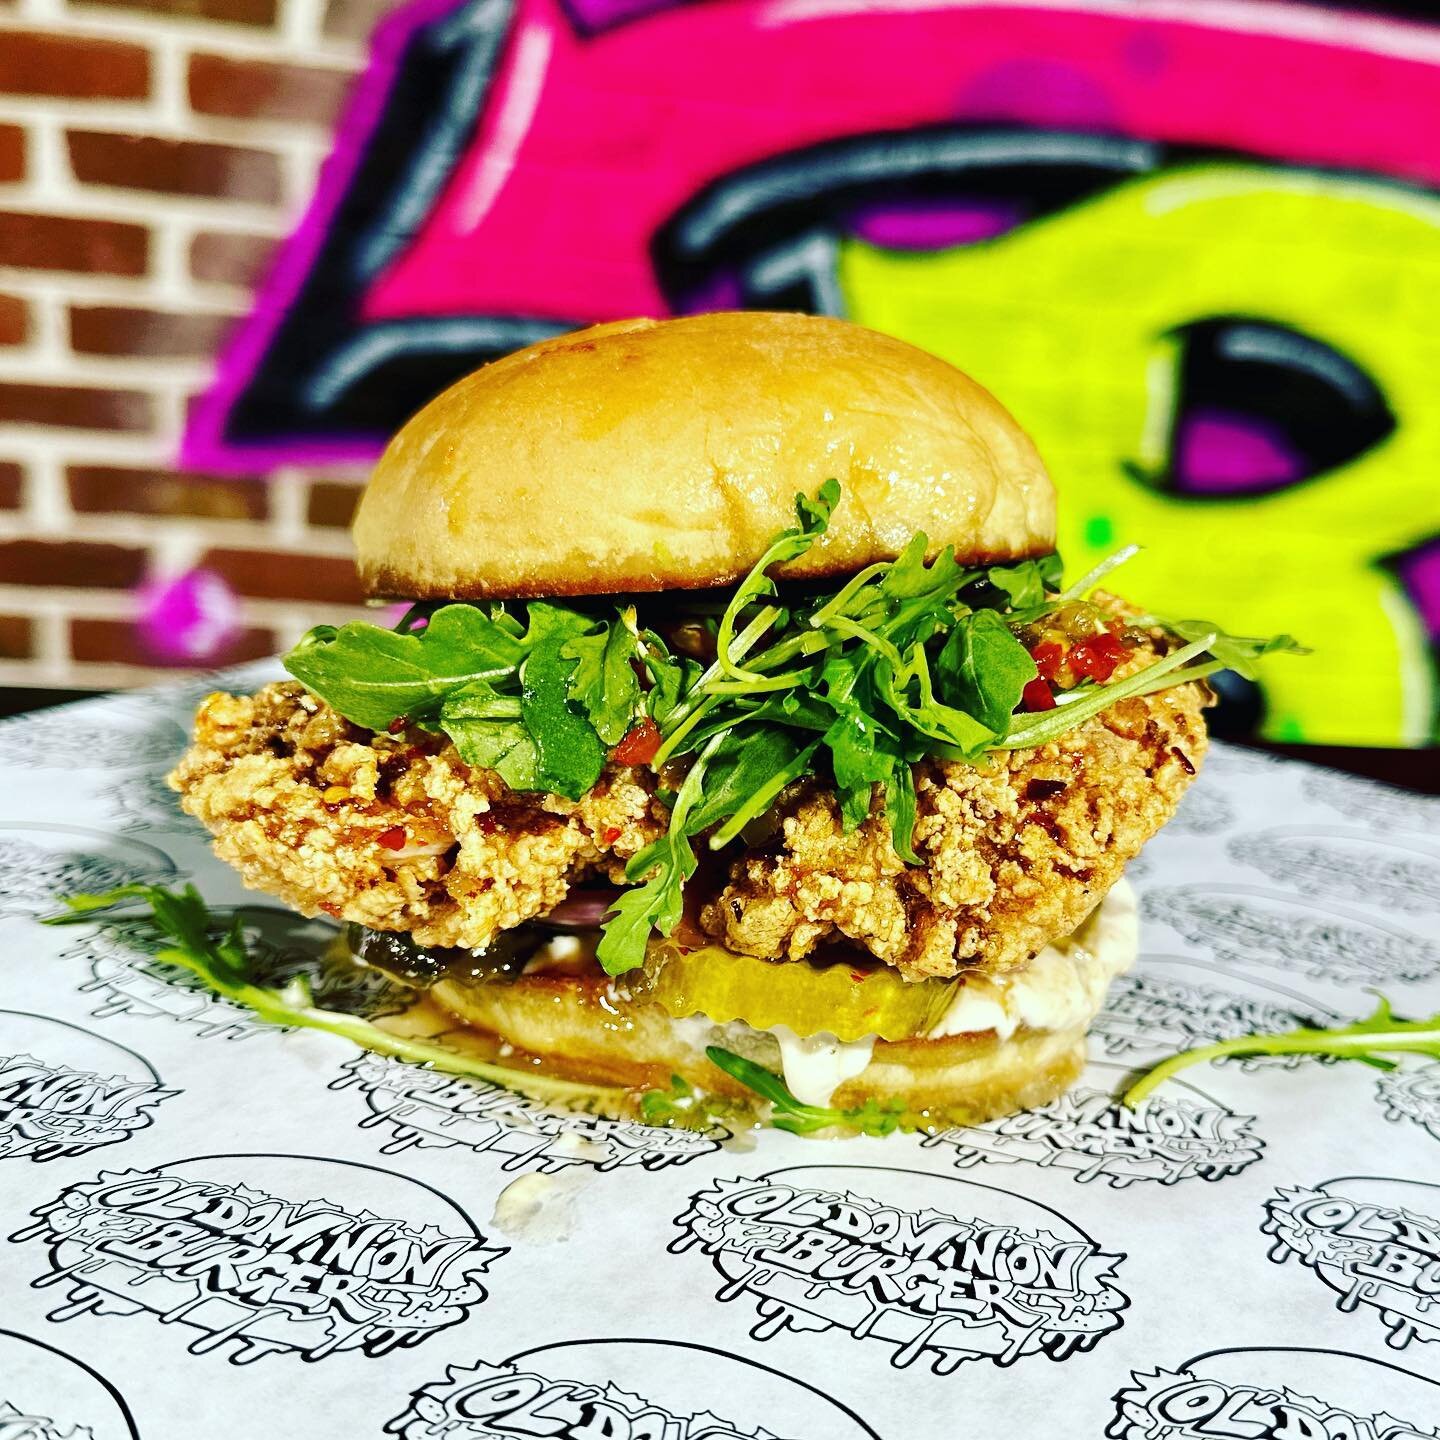 The Honey Bird is our newest chicken sandwich!
 
This marinated chicken thigh is fried and then tossed in hot honey. Served on a potato bun with goat cheese, pickled red onion, pepper relish, and arugula.